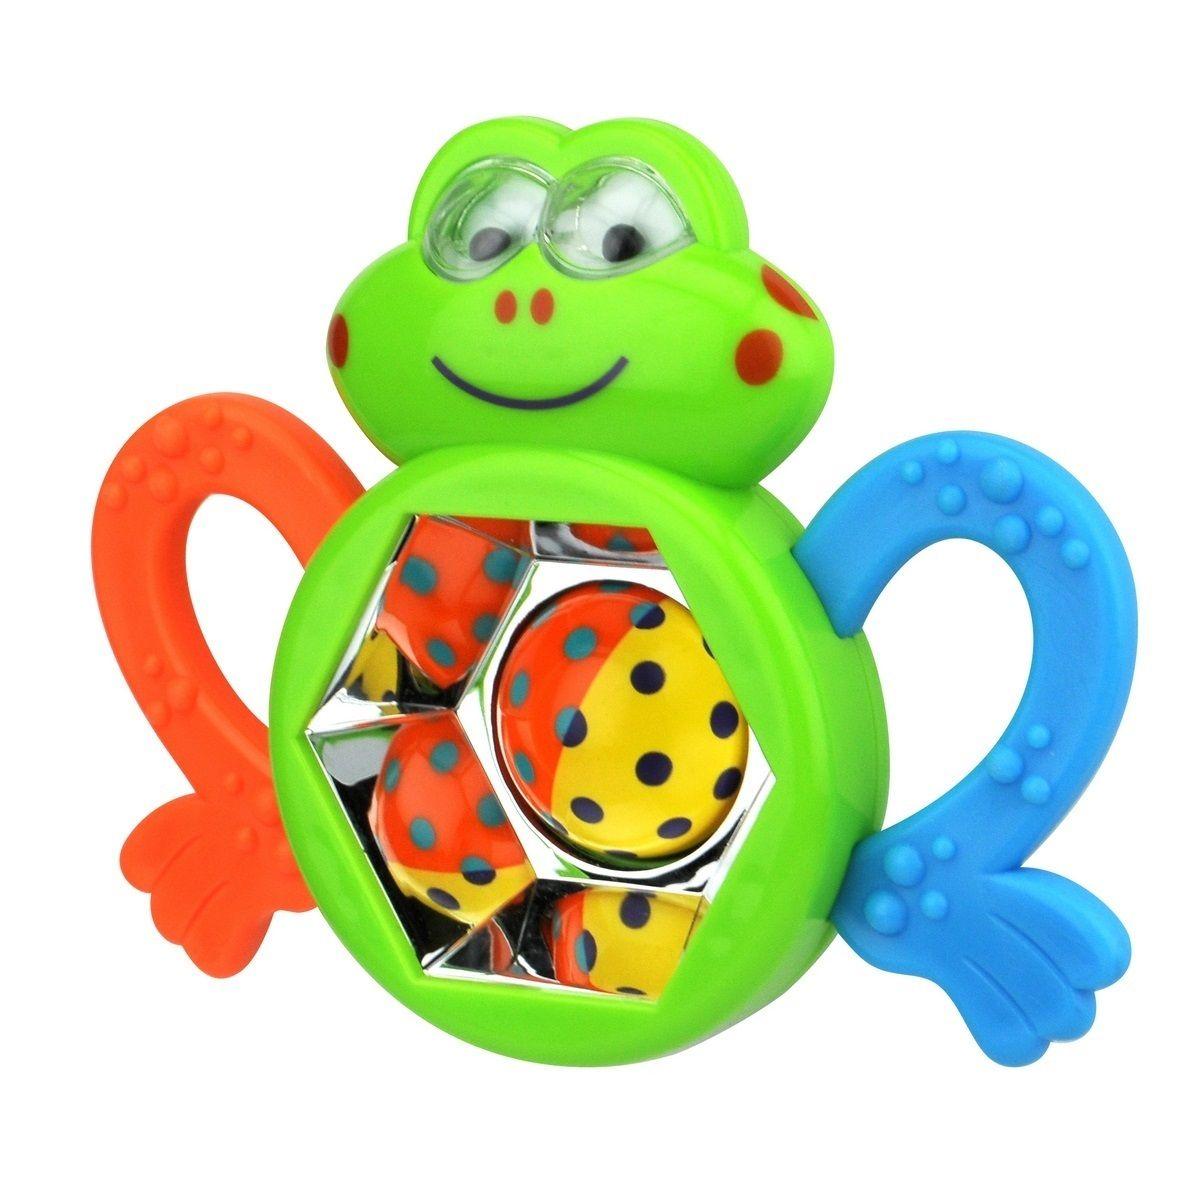 Educational toy / Teether - Frog